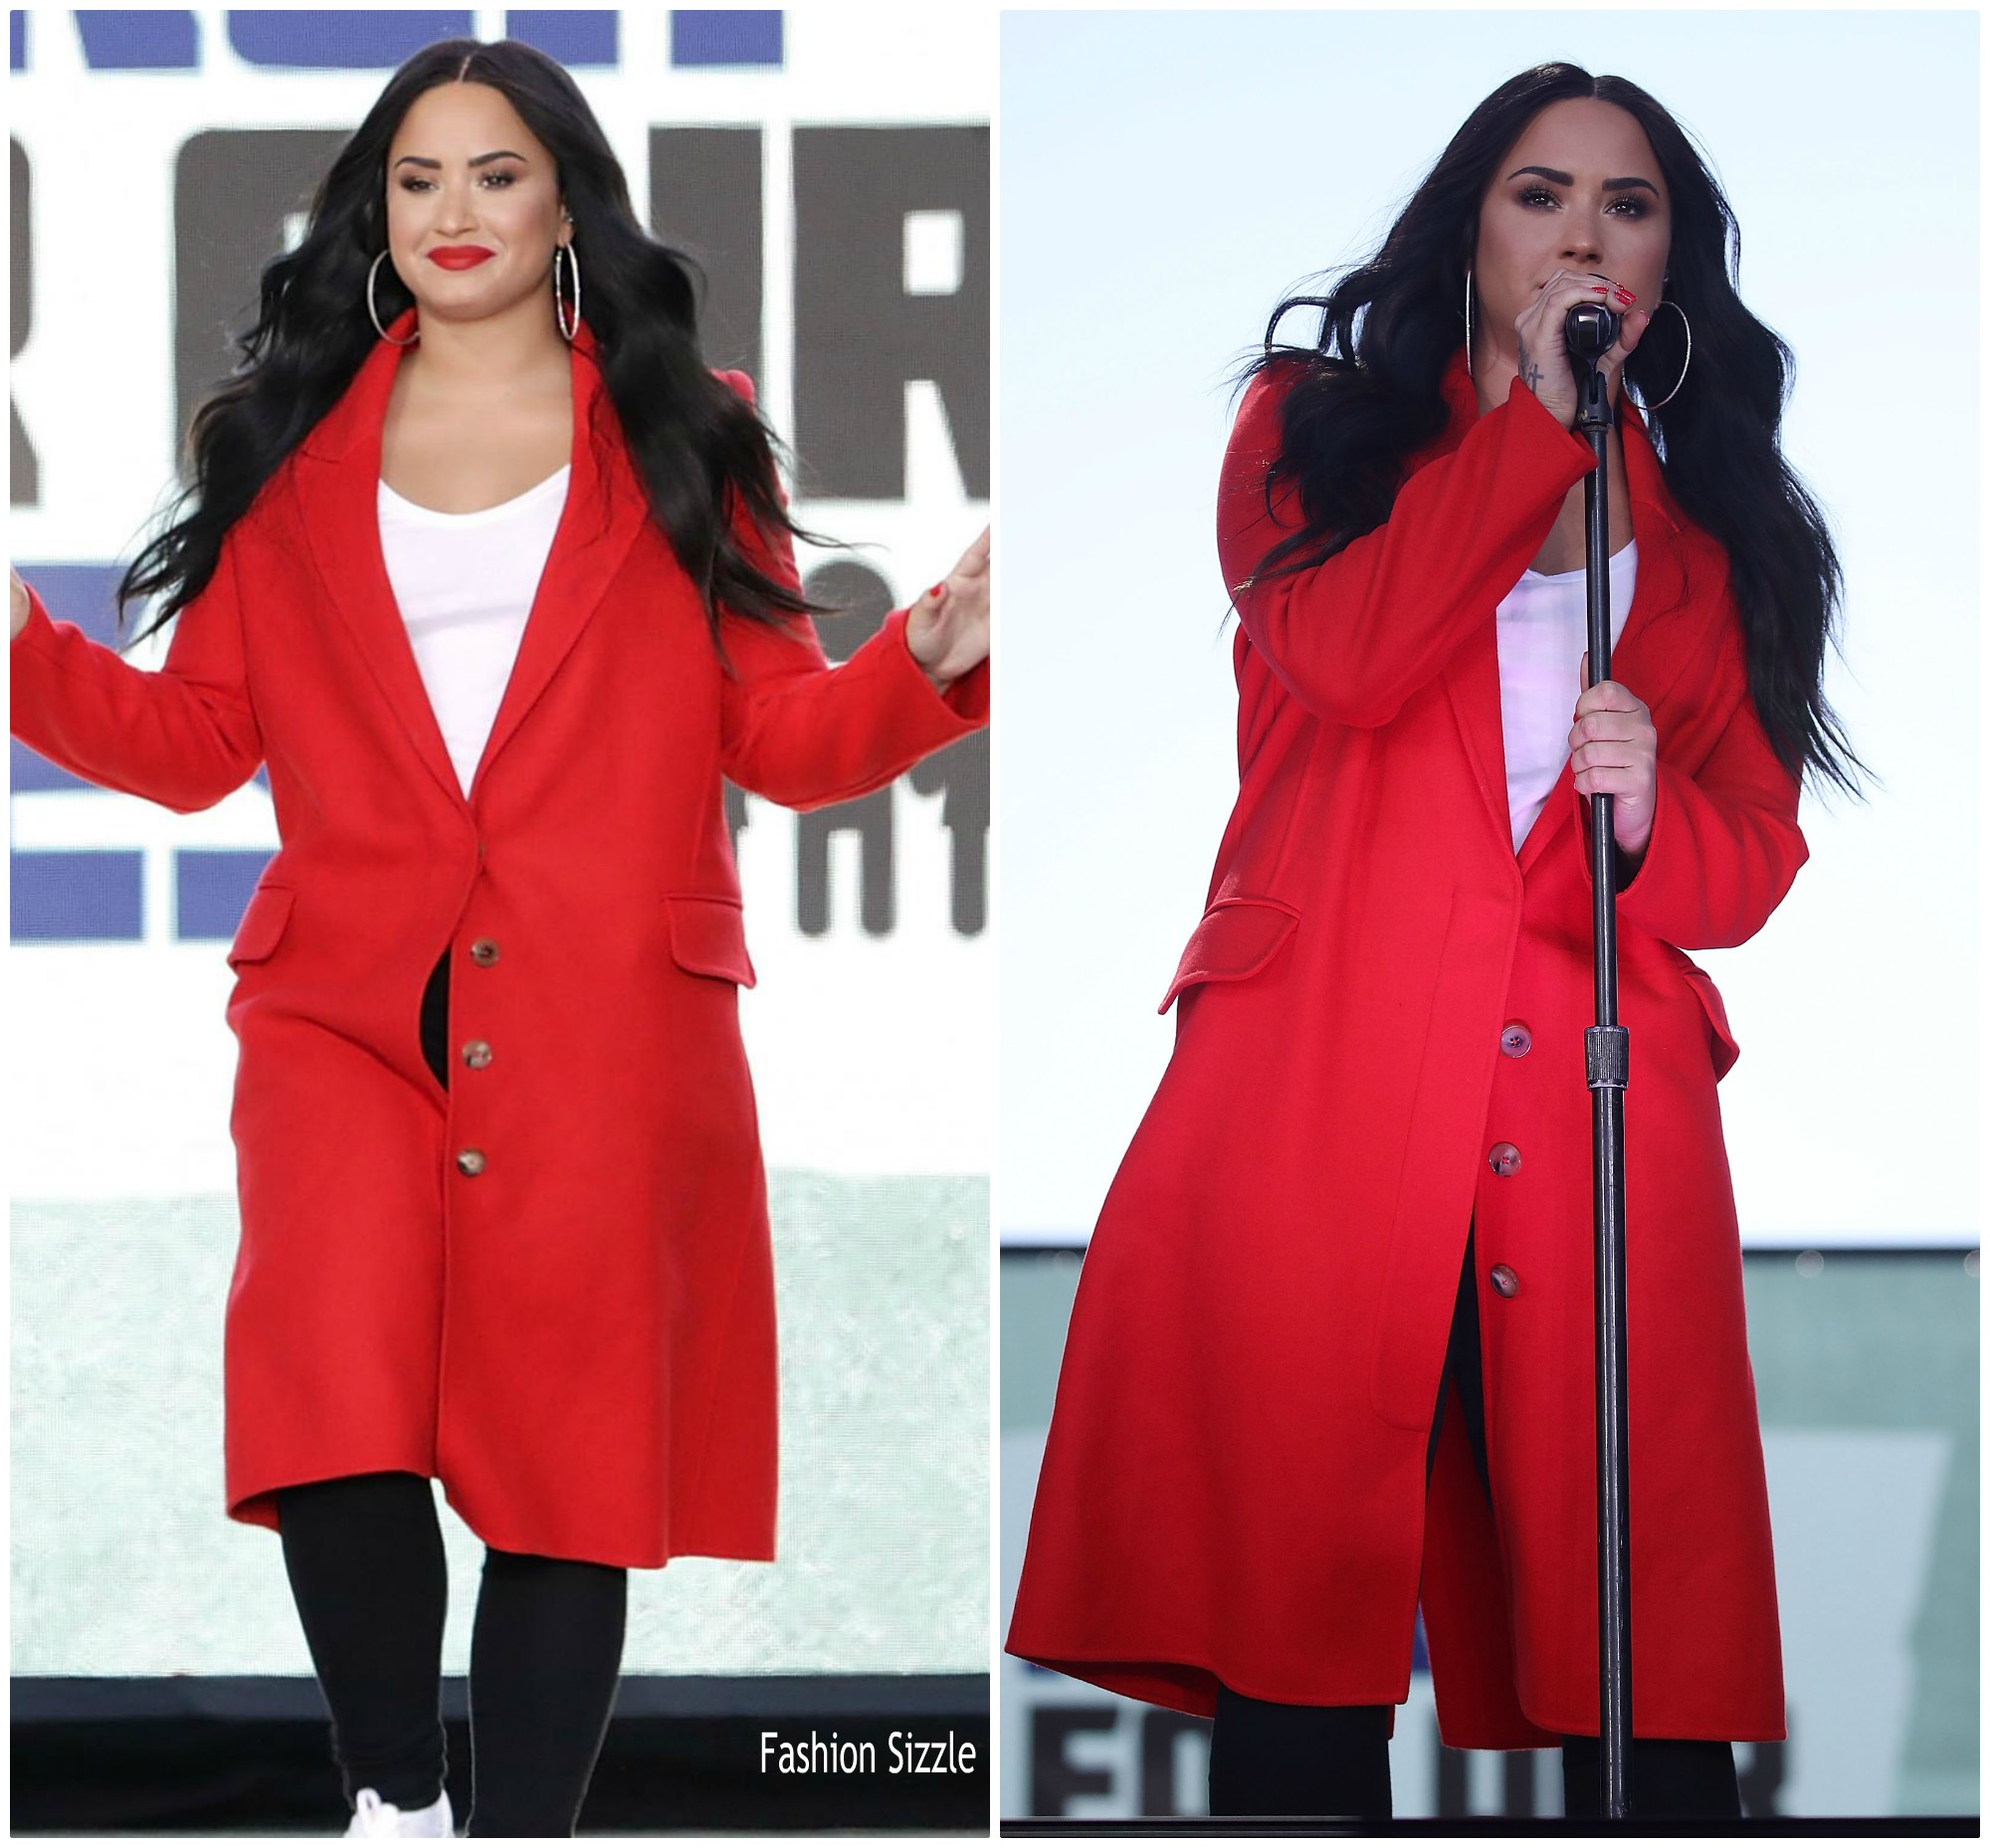 Demi Lovato  In Alexander Mcqueen Performing @ March For Our Lives